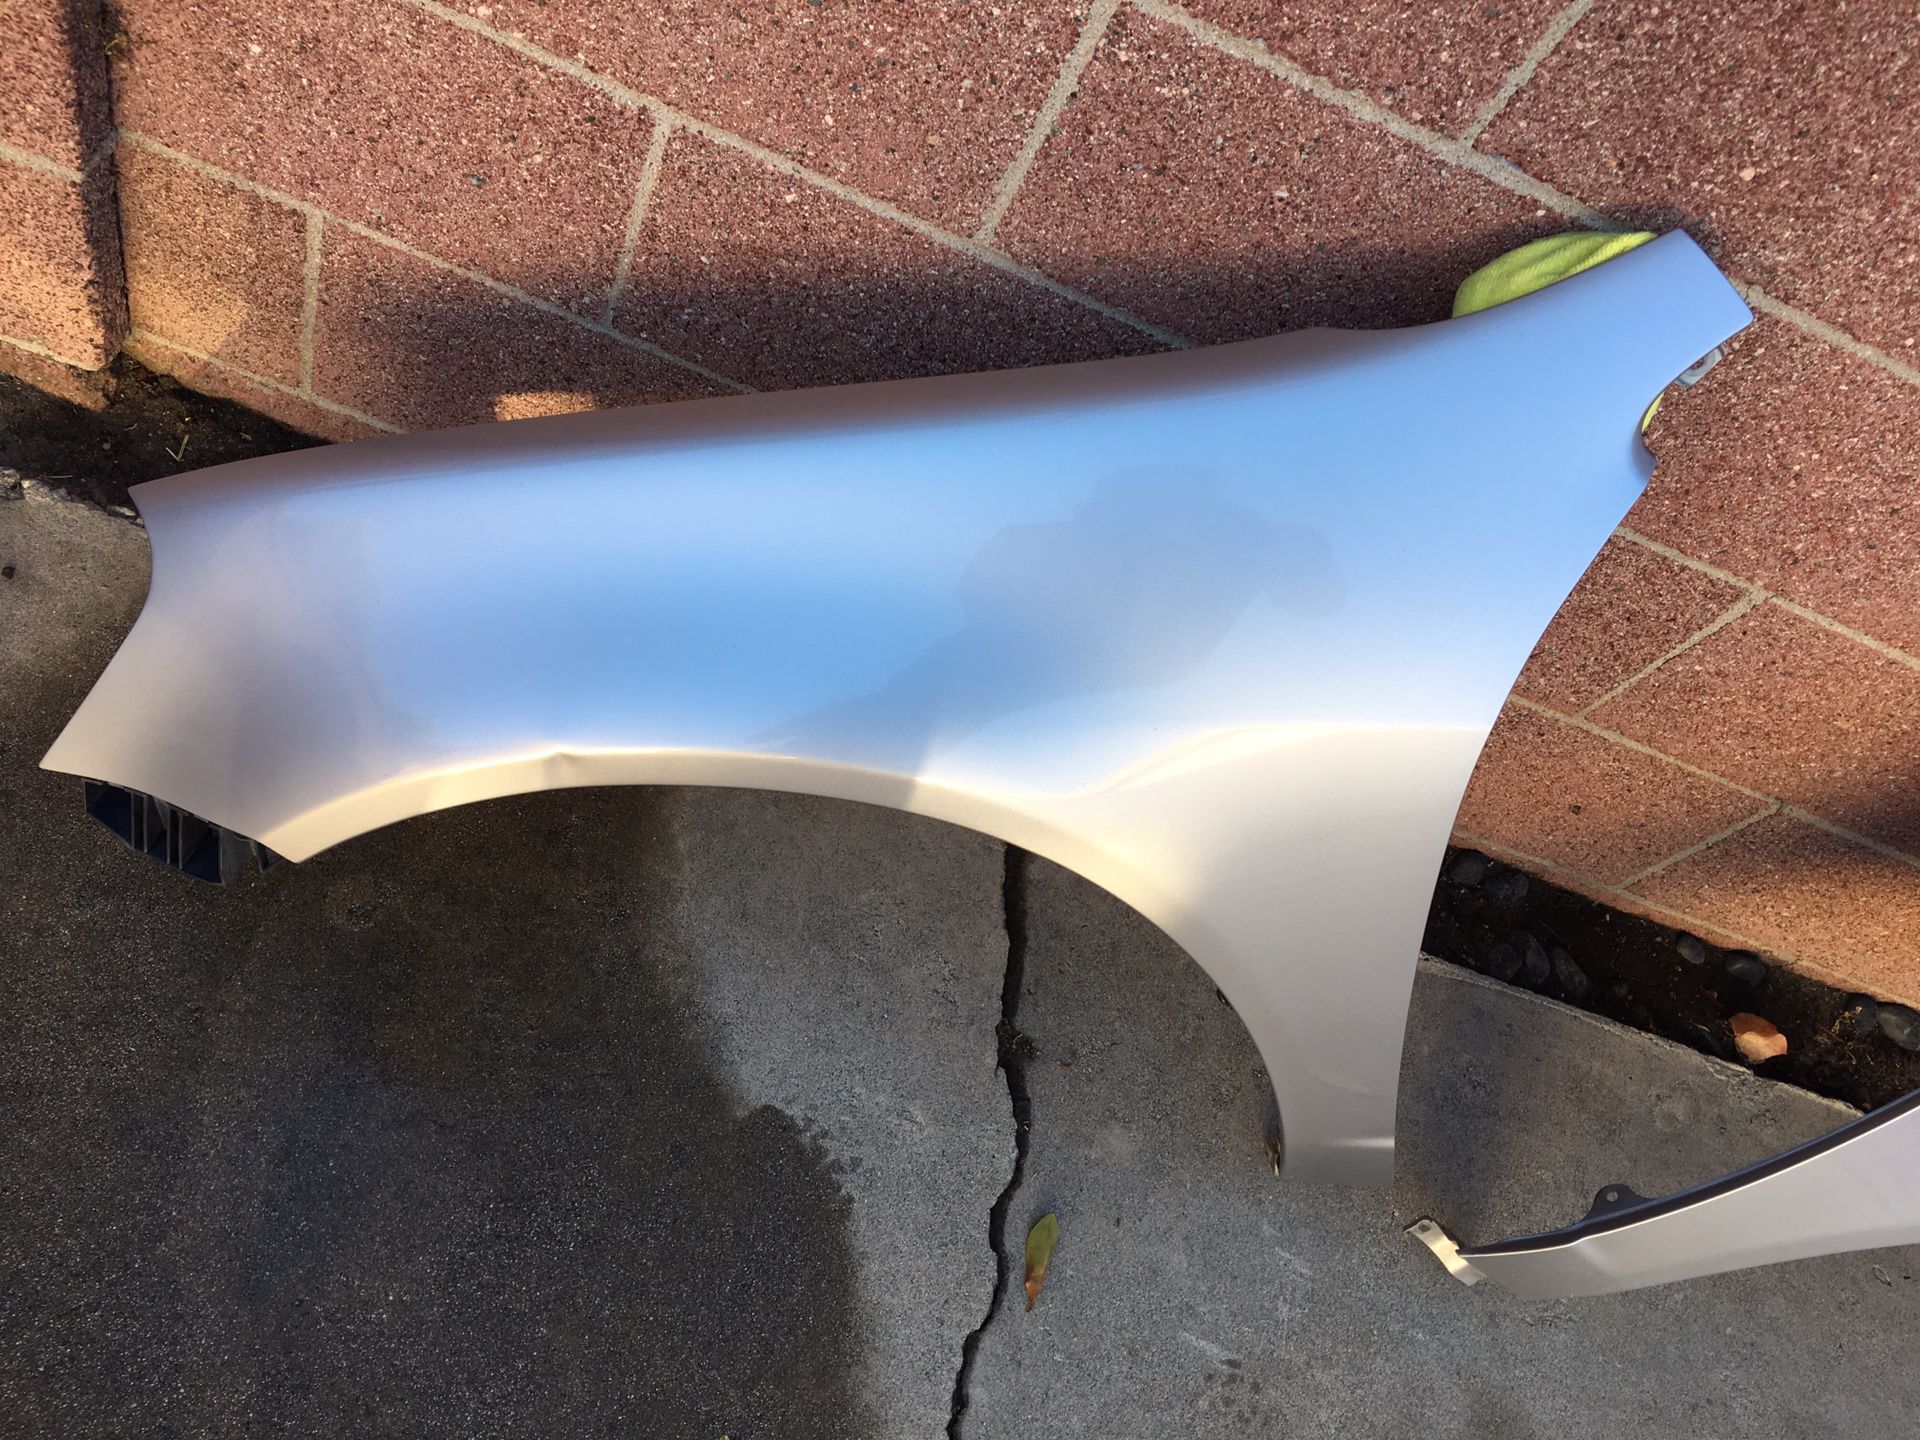 02-06 Acura Rsx Driver Side Fender Oem Honda Part,SSM Satin Silver Metallic Paint is Very Clean , Asking $100.00 Firm